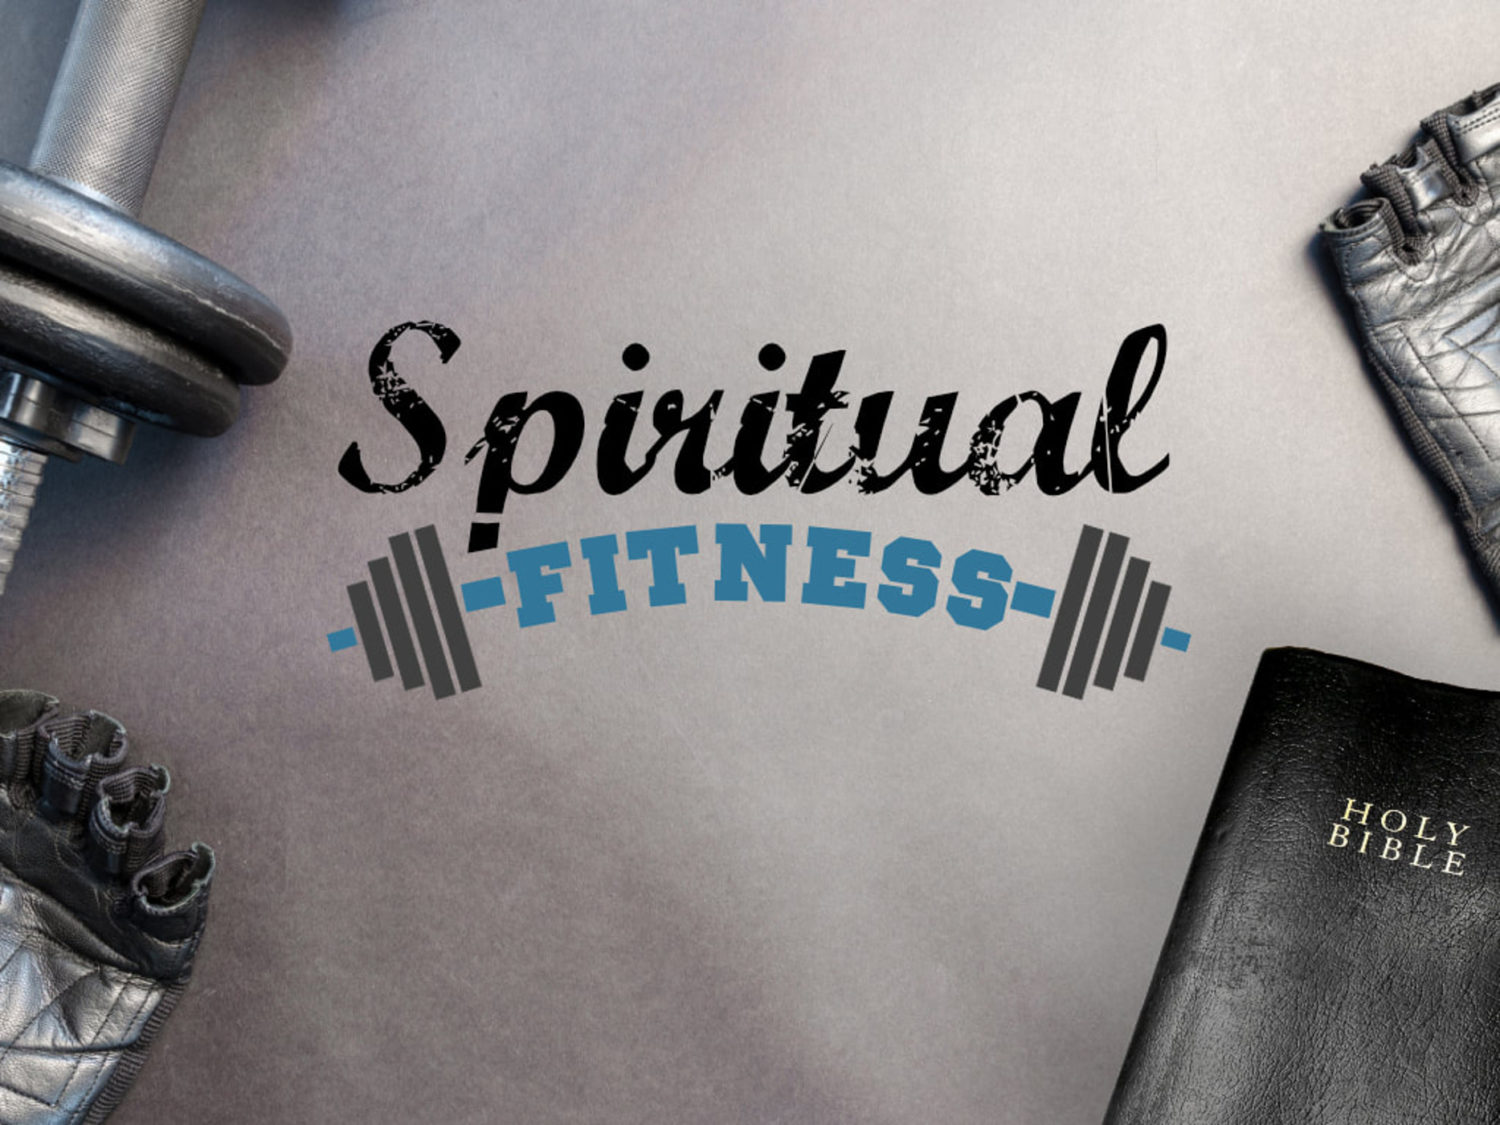 Working on your spiritual fitness